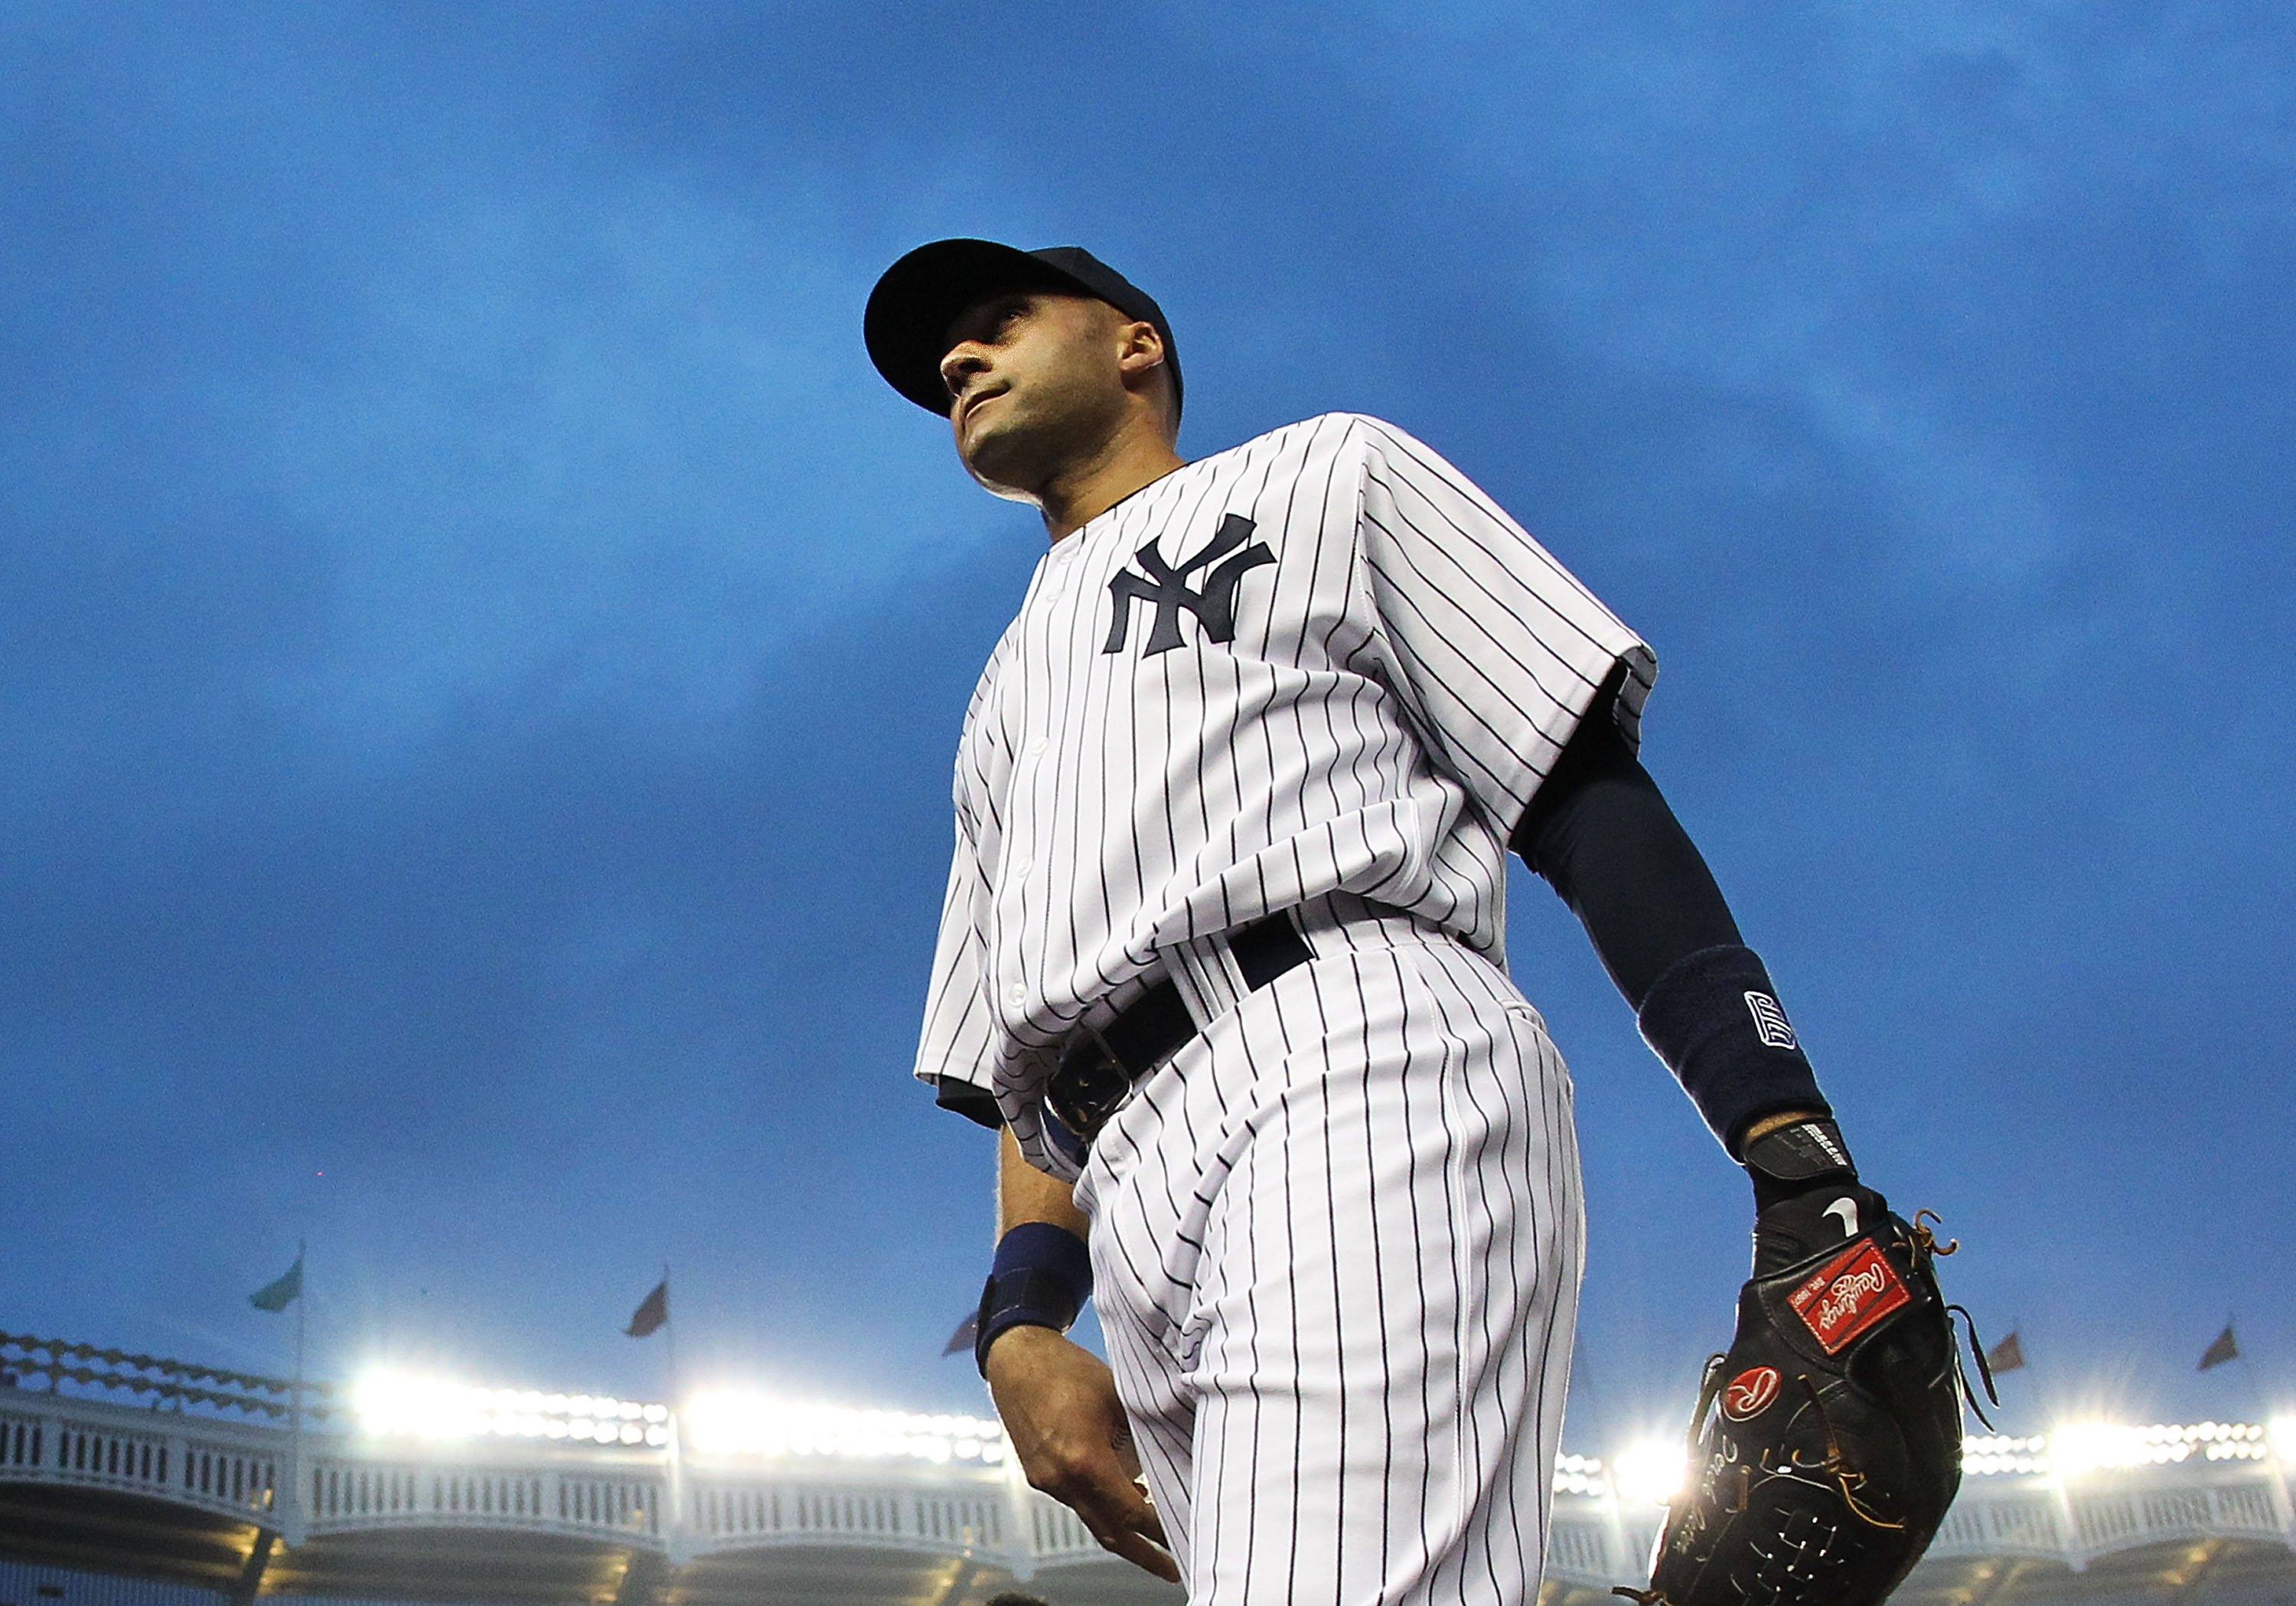 Derek Jeter: 9 Bold Predictions for His Next 2 Years